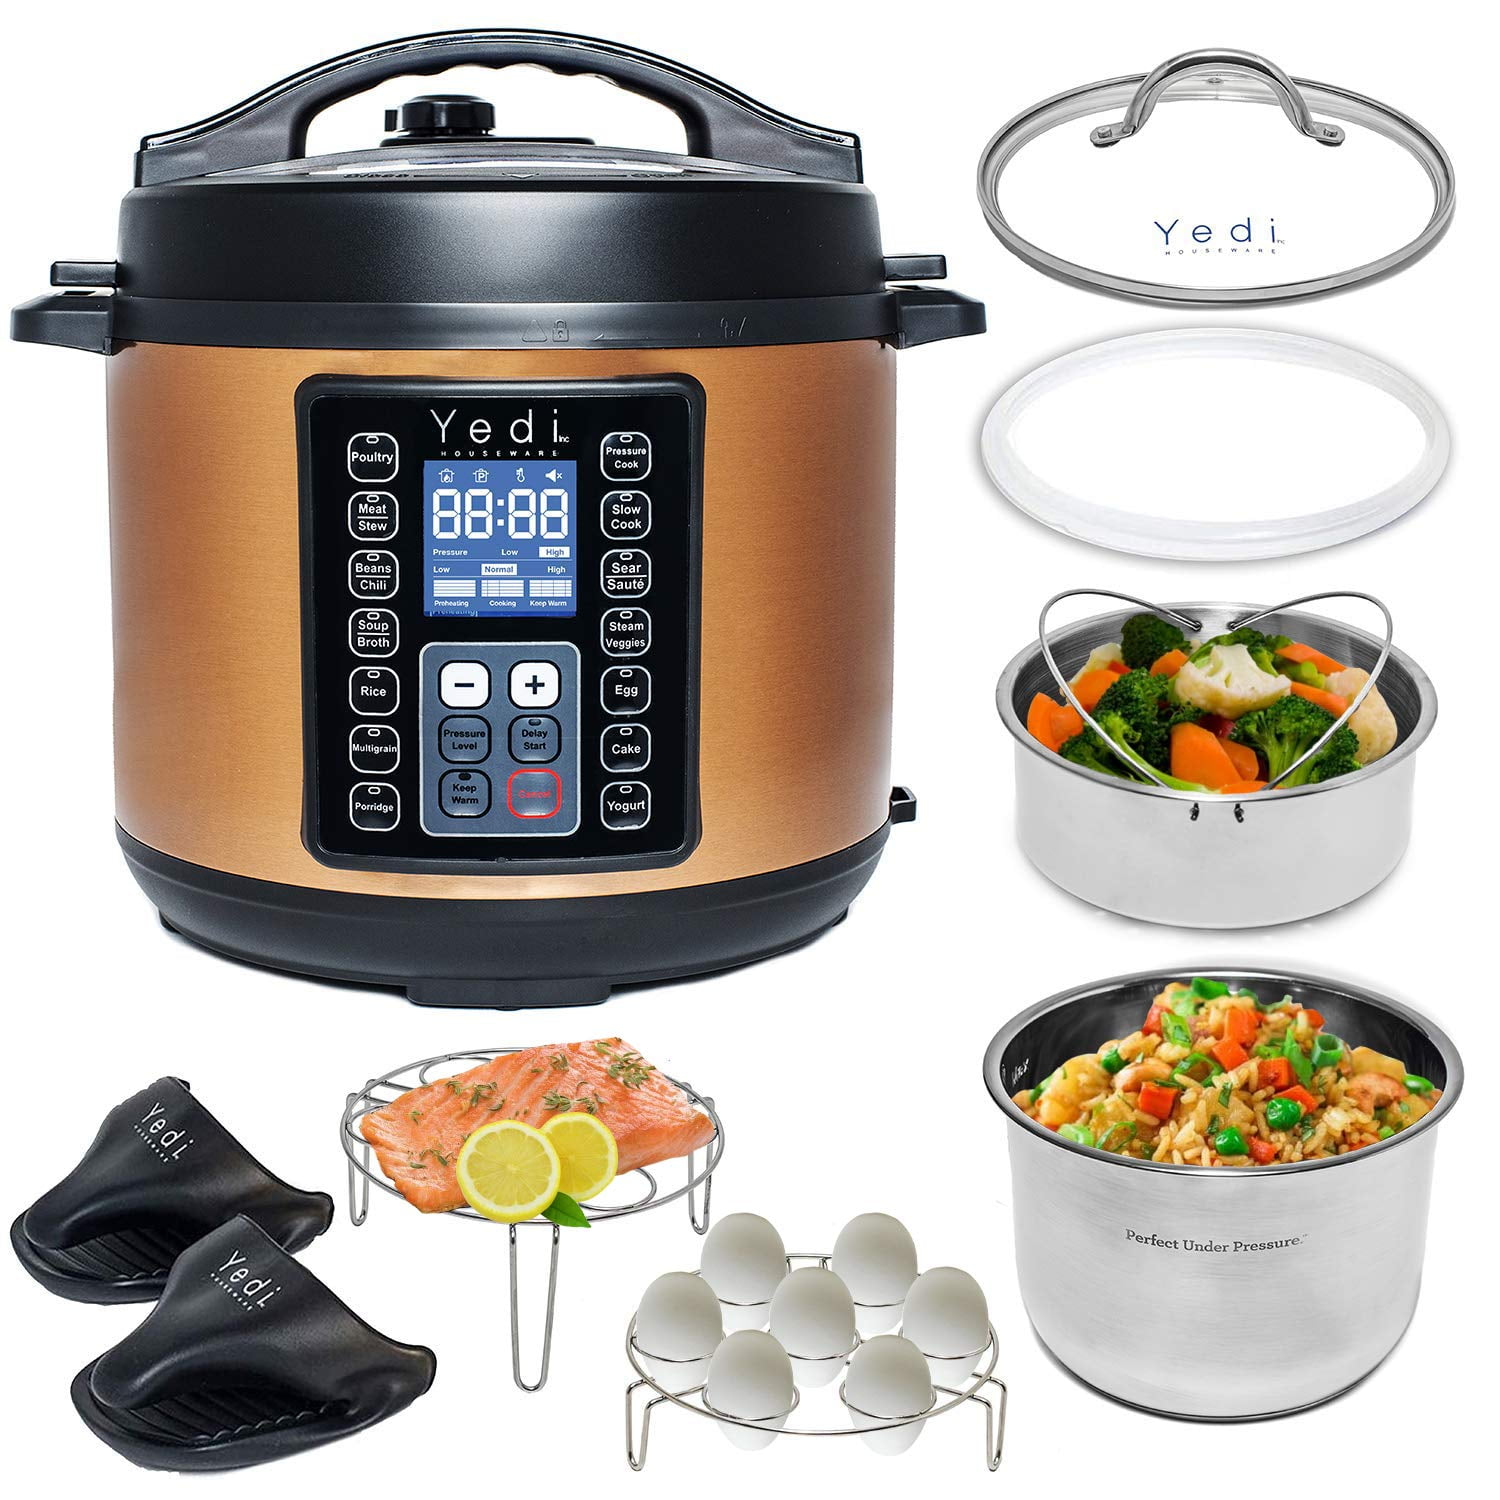 Yedi 9-in-1 Total Package Instant Programmable Pressure Cooker, 6 Quart,  Deluxe Accessory kit, Recipes, Pressure Cook, Slow Cook, Rice Cooker,  Yogurt Maker, Egg…